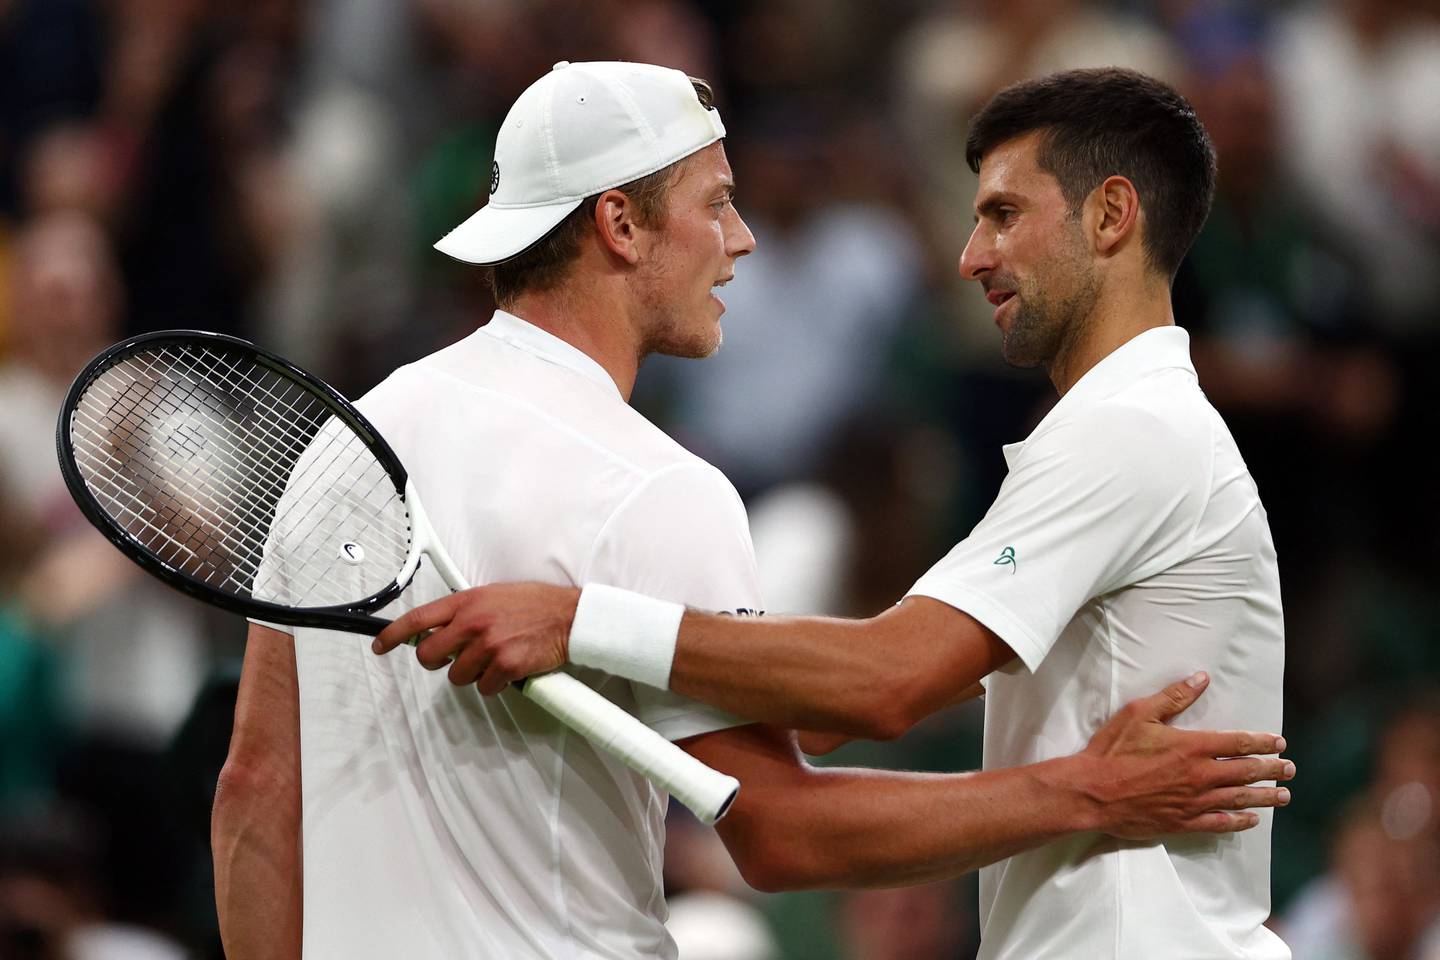 Serbia's Novak Djokovic, right, with the Netherlands' Tim van Rijthoven after their match at Wimbledon on Sunday. AFP